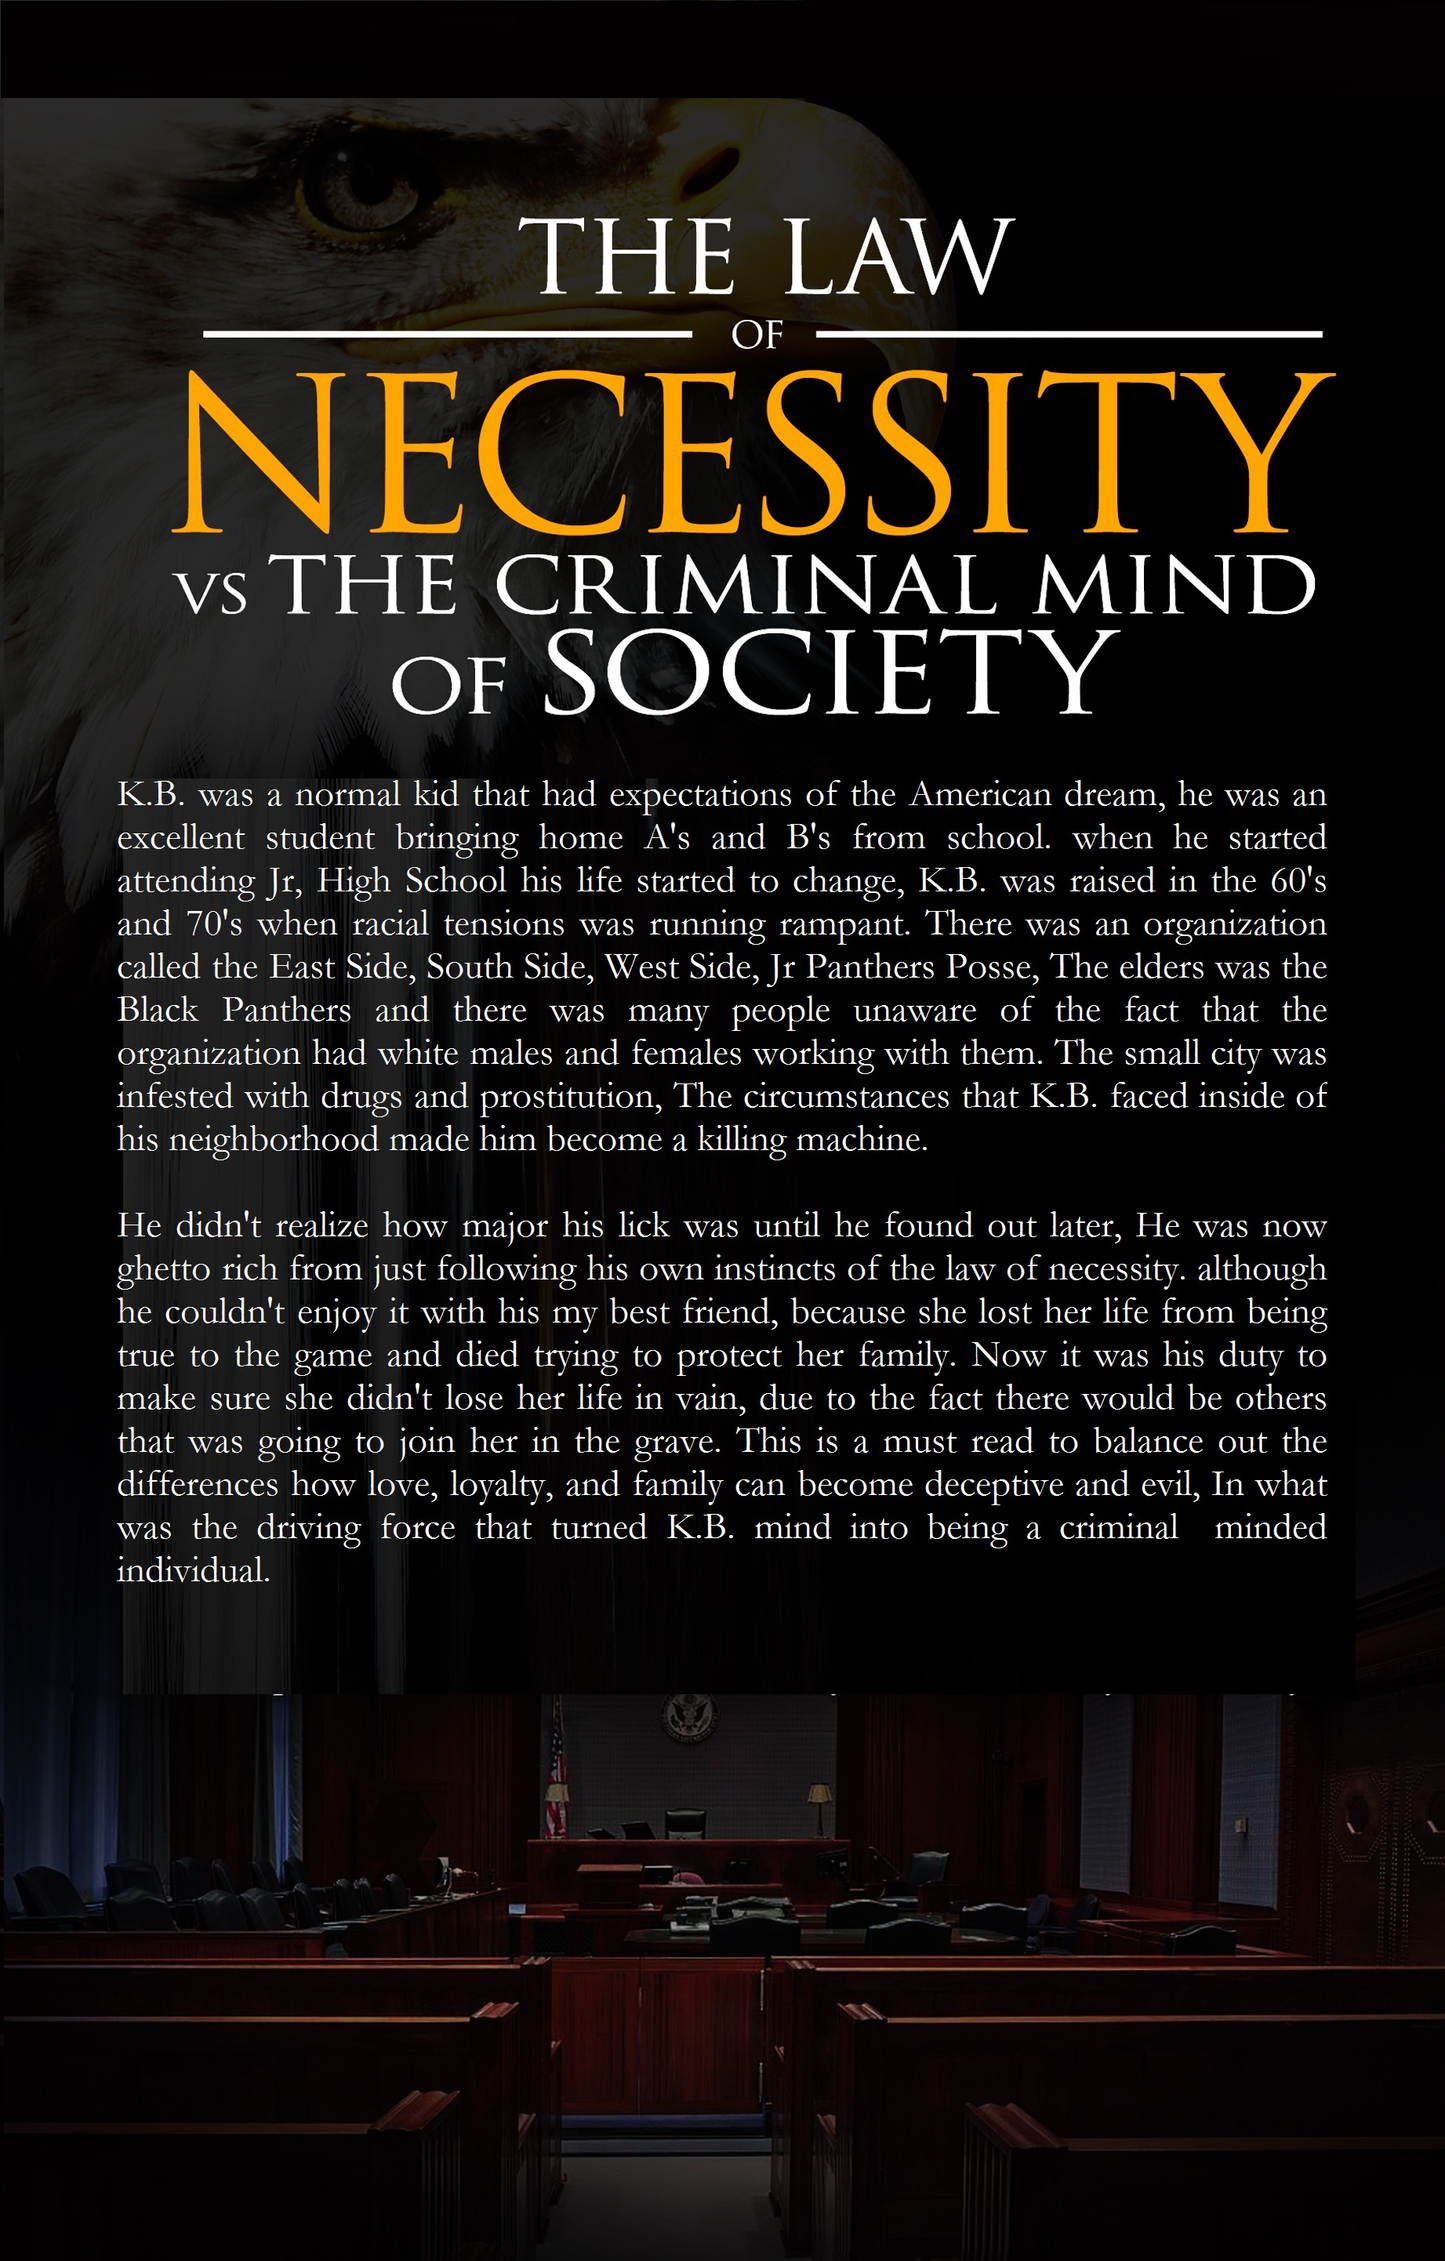 The Law of Necessity vs. The Criminal Mind of Society